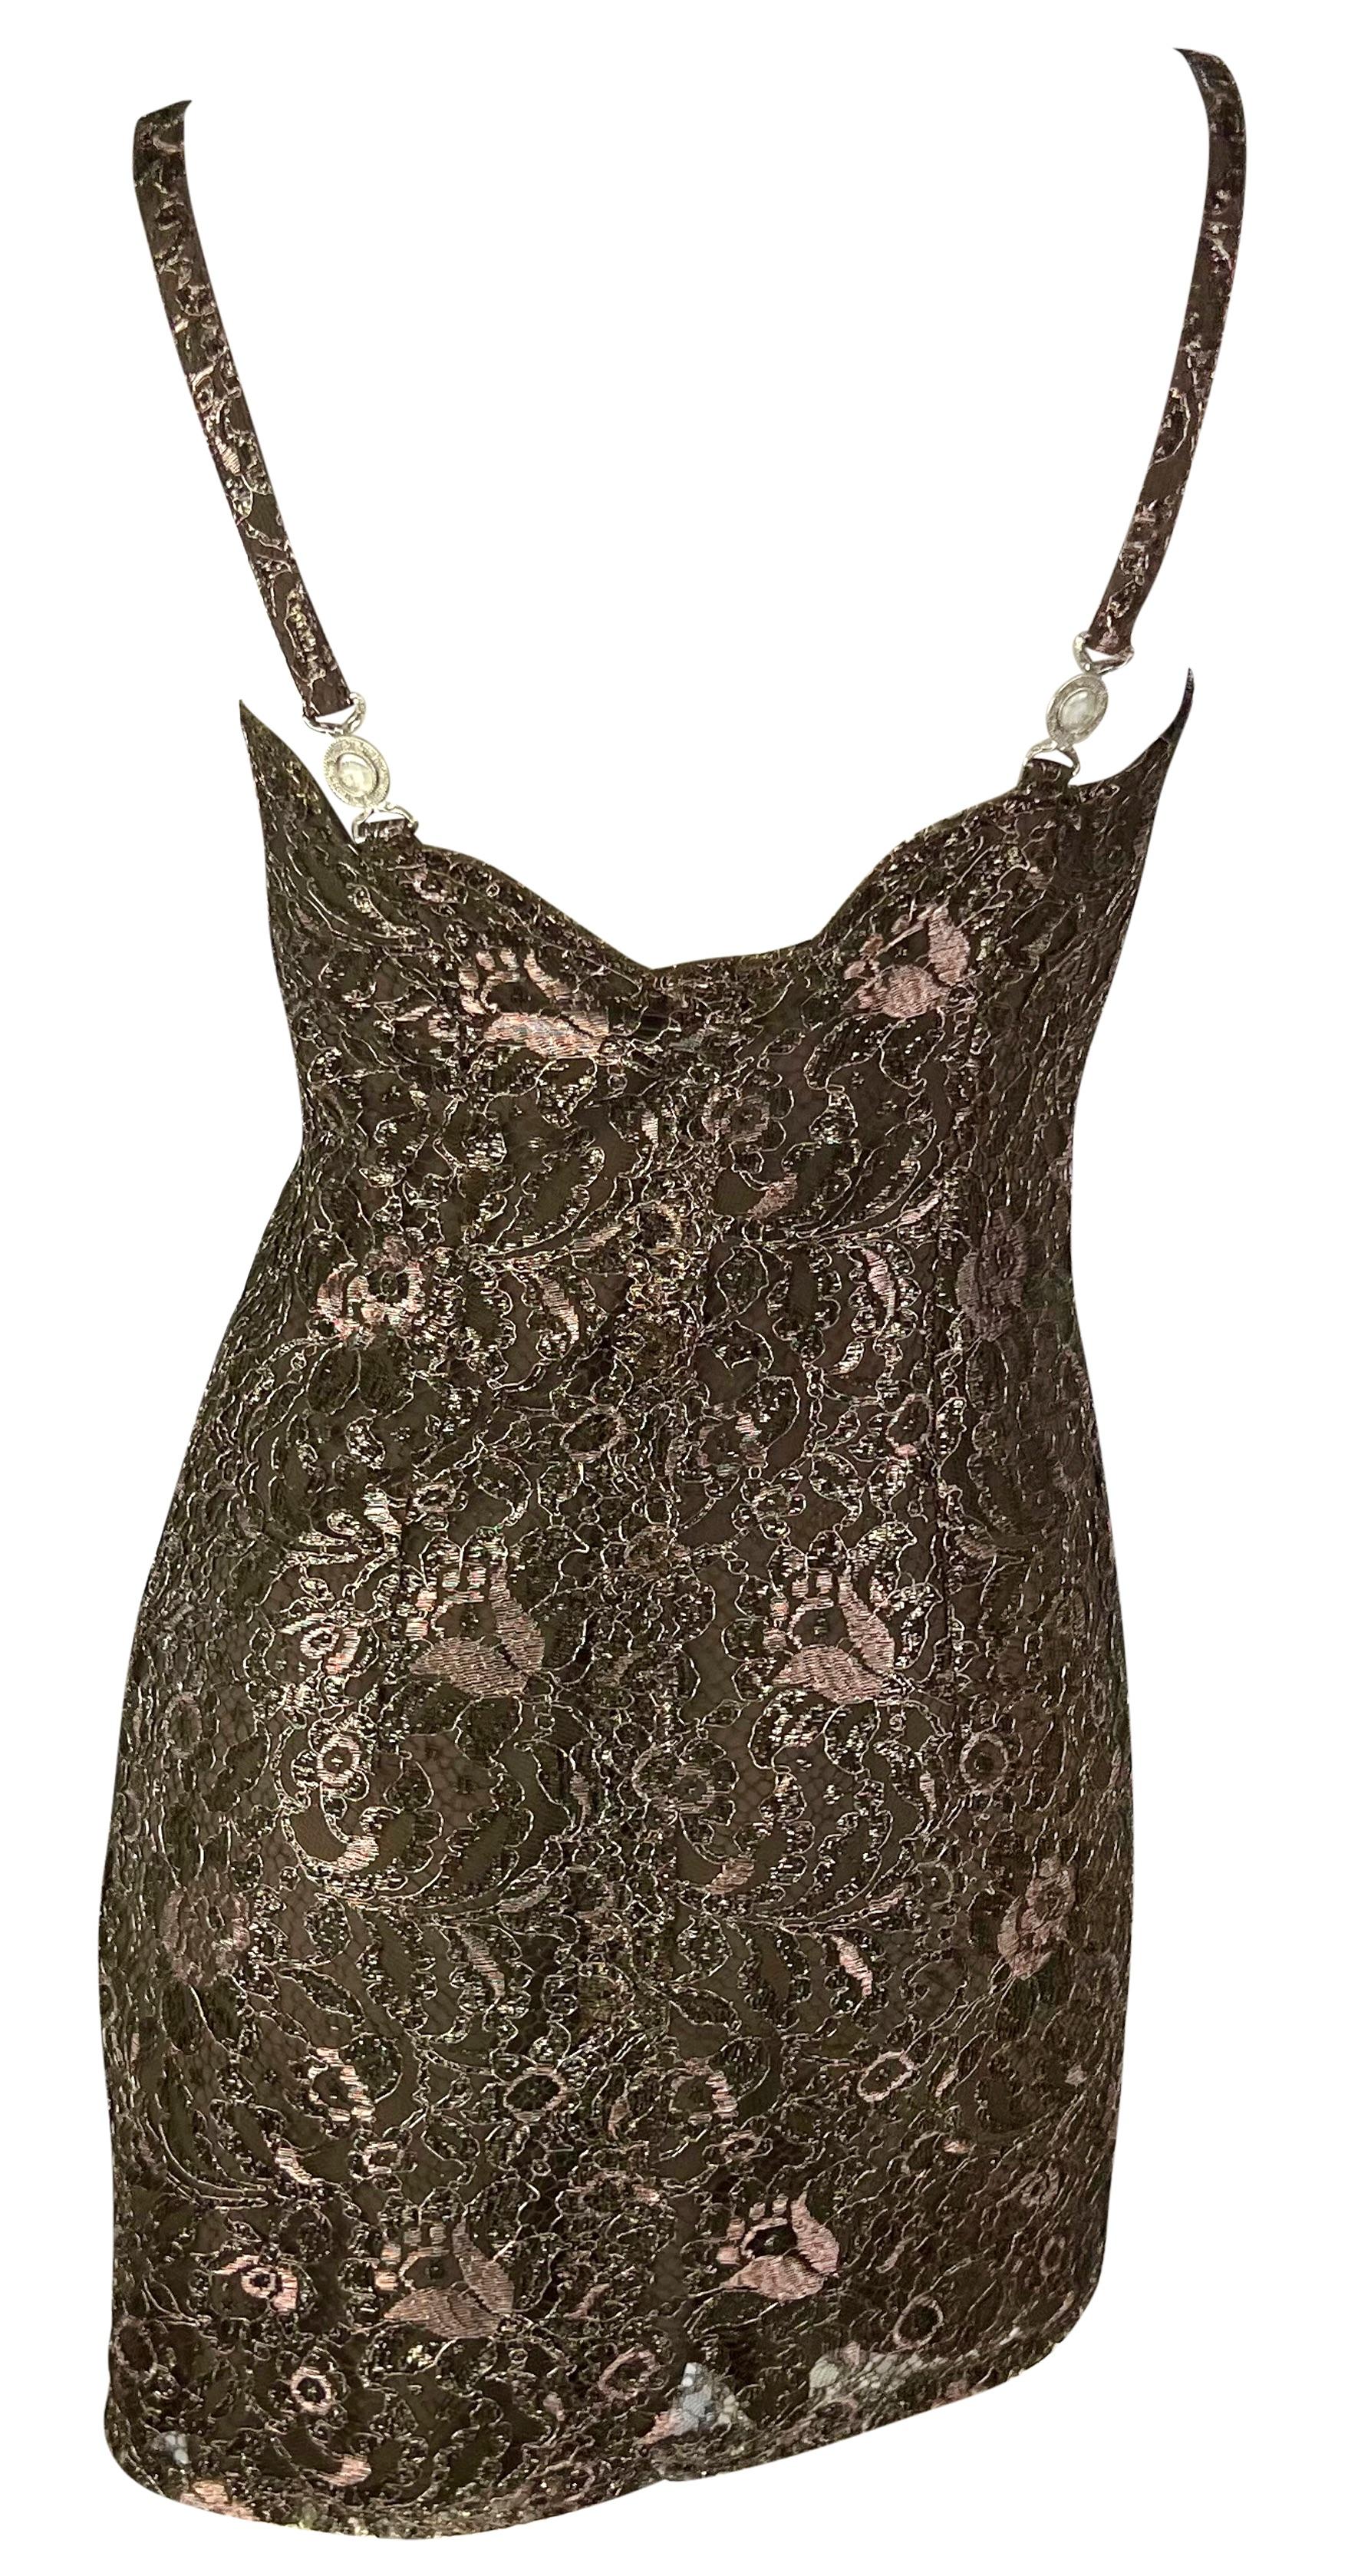 F/W 1996 Gianni Versace Couture Metallic Brown Floral Lace Medusa Mini Dress For Sale 1